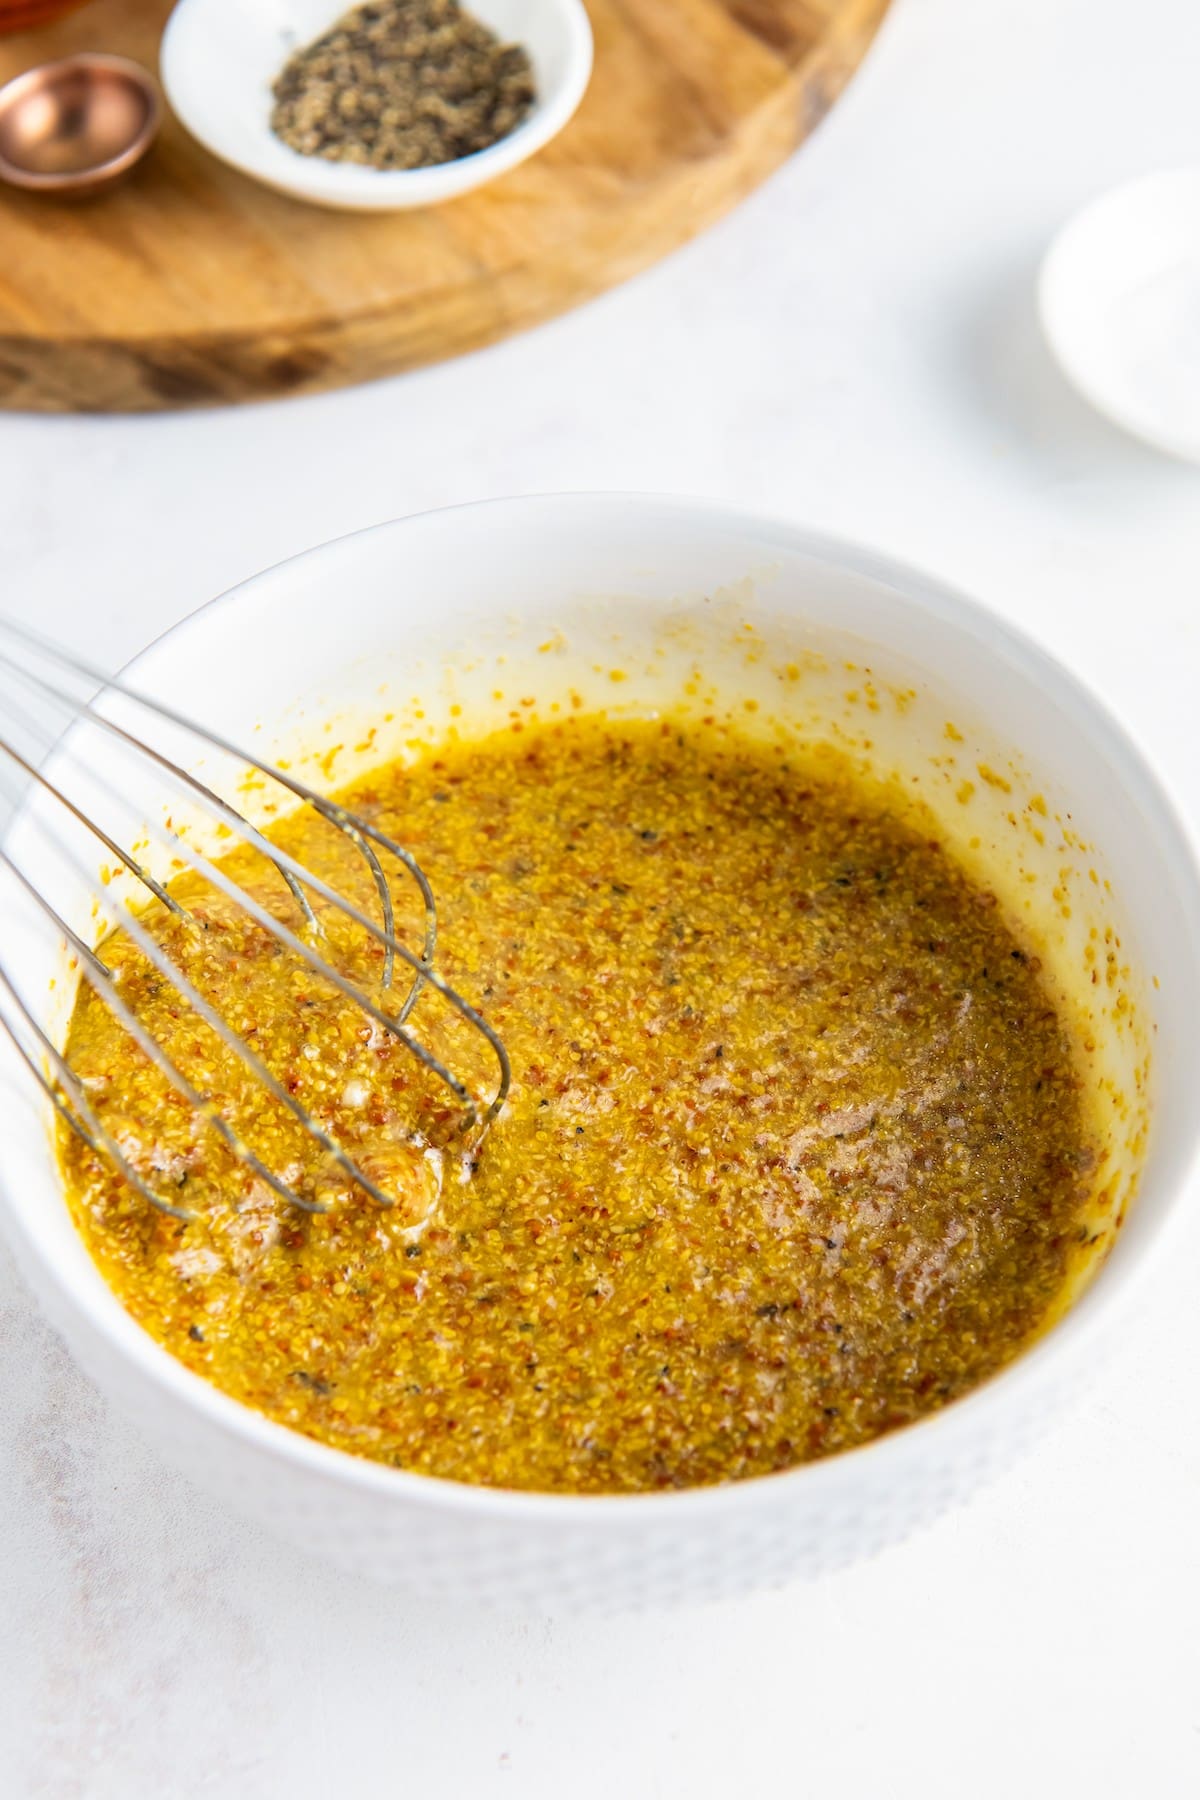 Honey mustard dressing whisked together in a bowl.